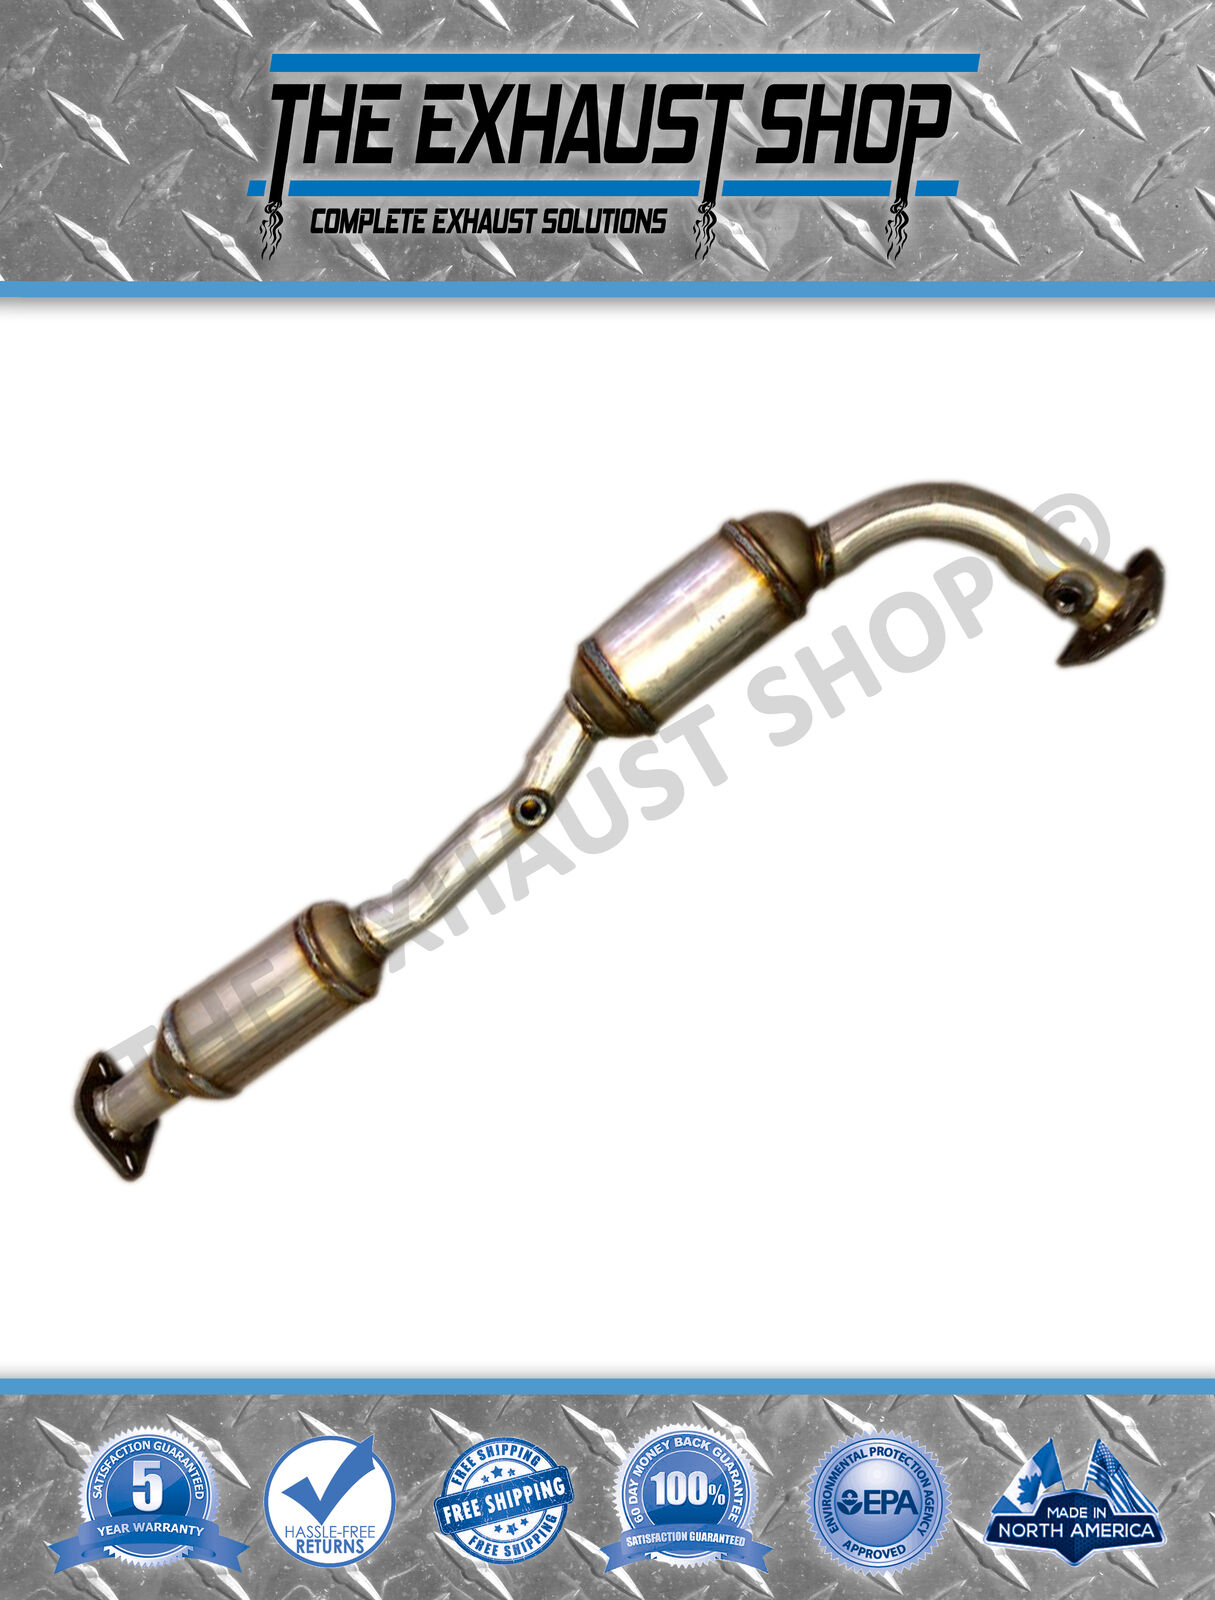 FITS: 08-16 TOYOTA SEQUOIA/2007-2017 TUNDRA 4.6/5.7L RIGHT CATALYTIC CONVERTER